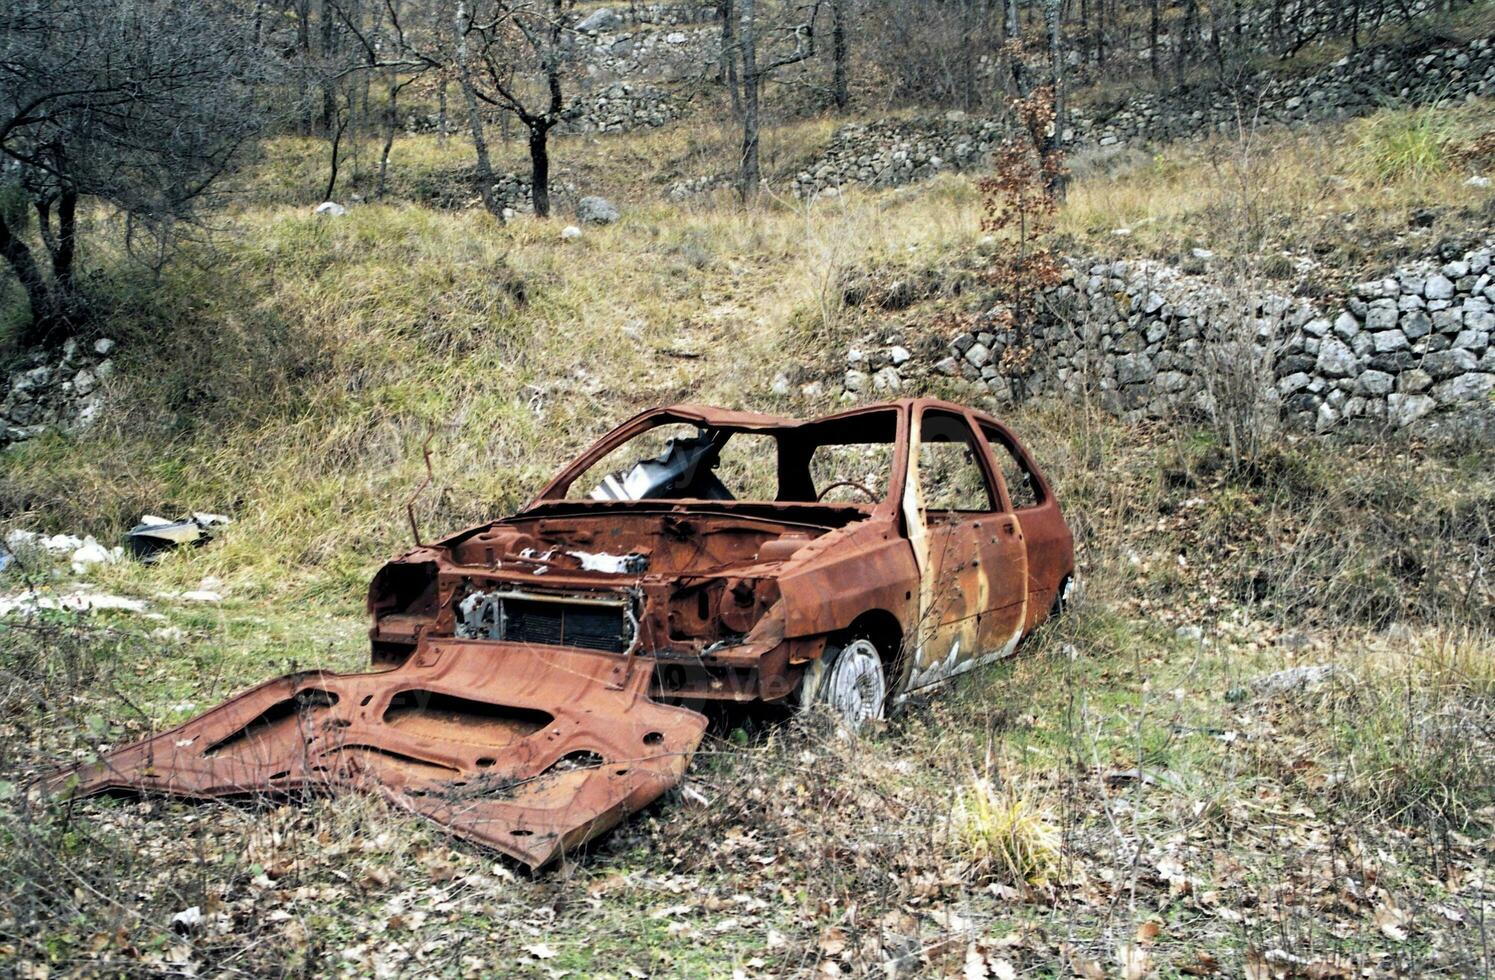 Rustic Remains Abandoned Wreckage of a Crashed Car photo